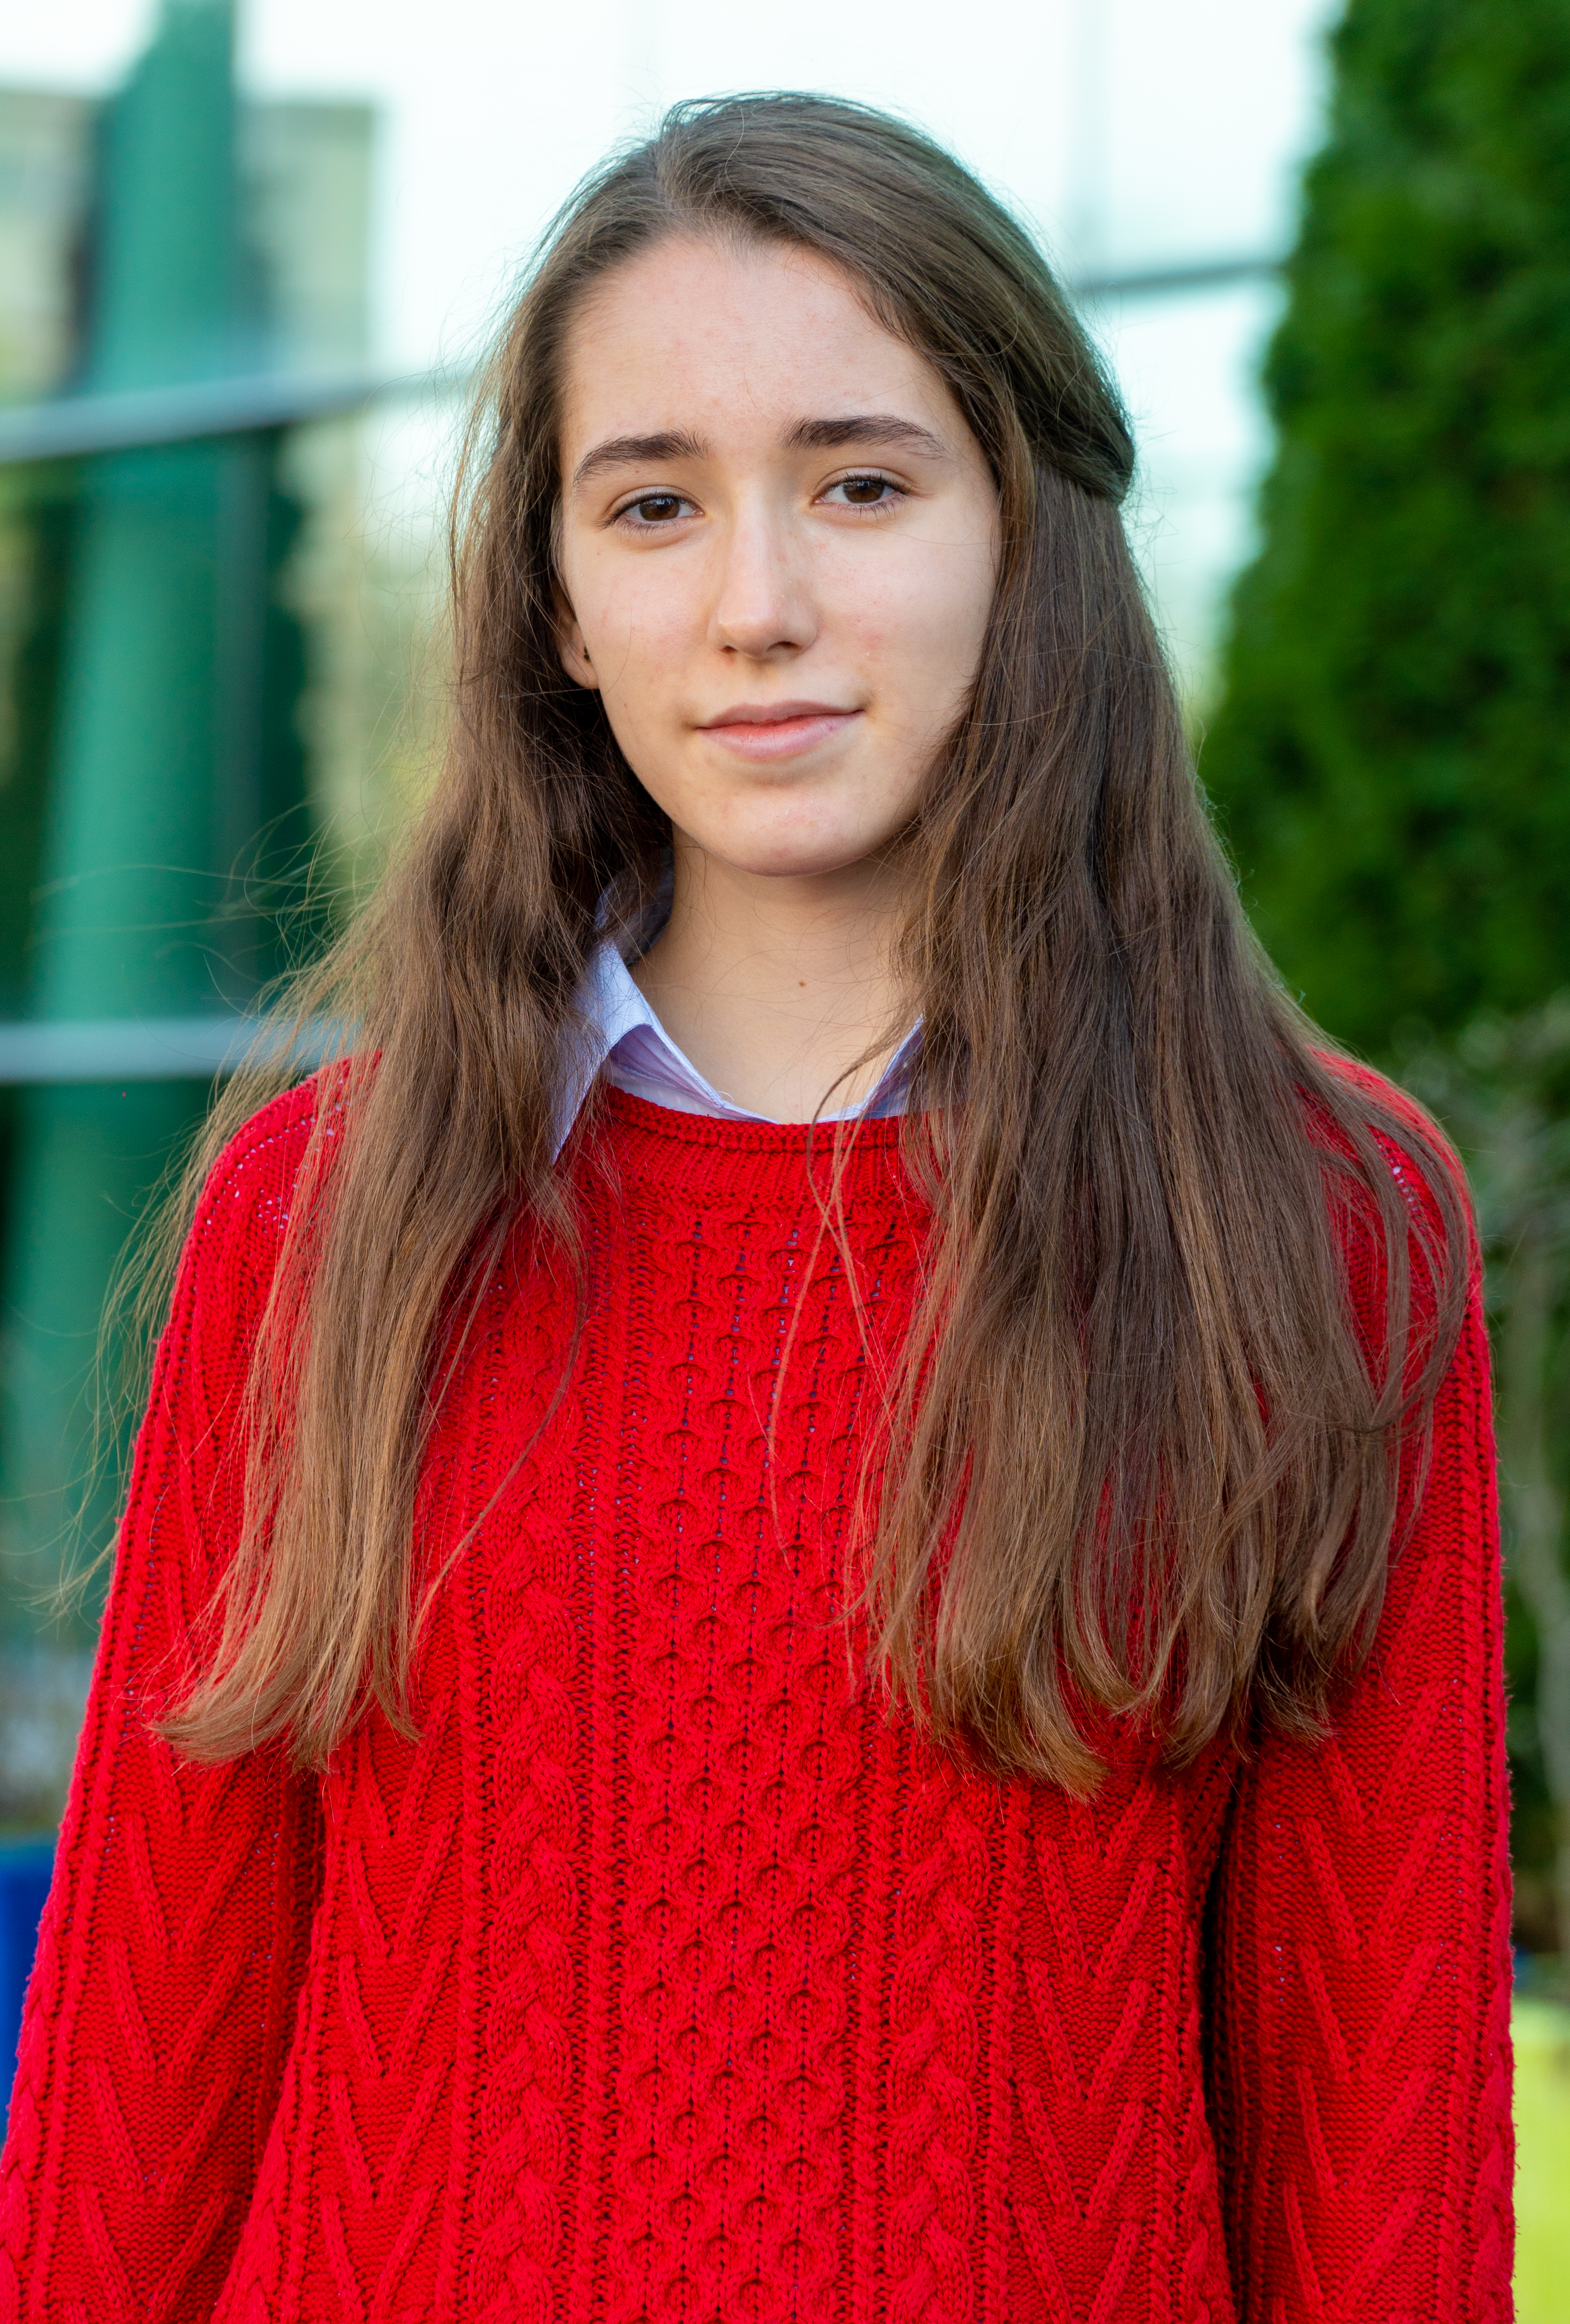 Andra A. Year 12 student, first year of International Baccalaureate Diploma Programme